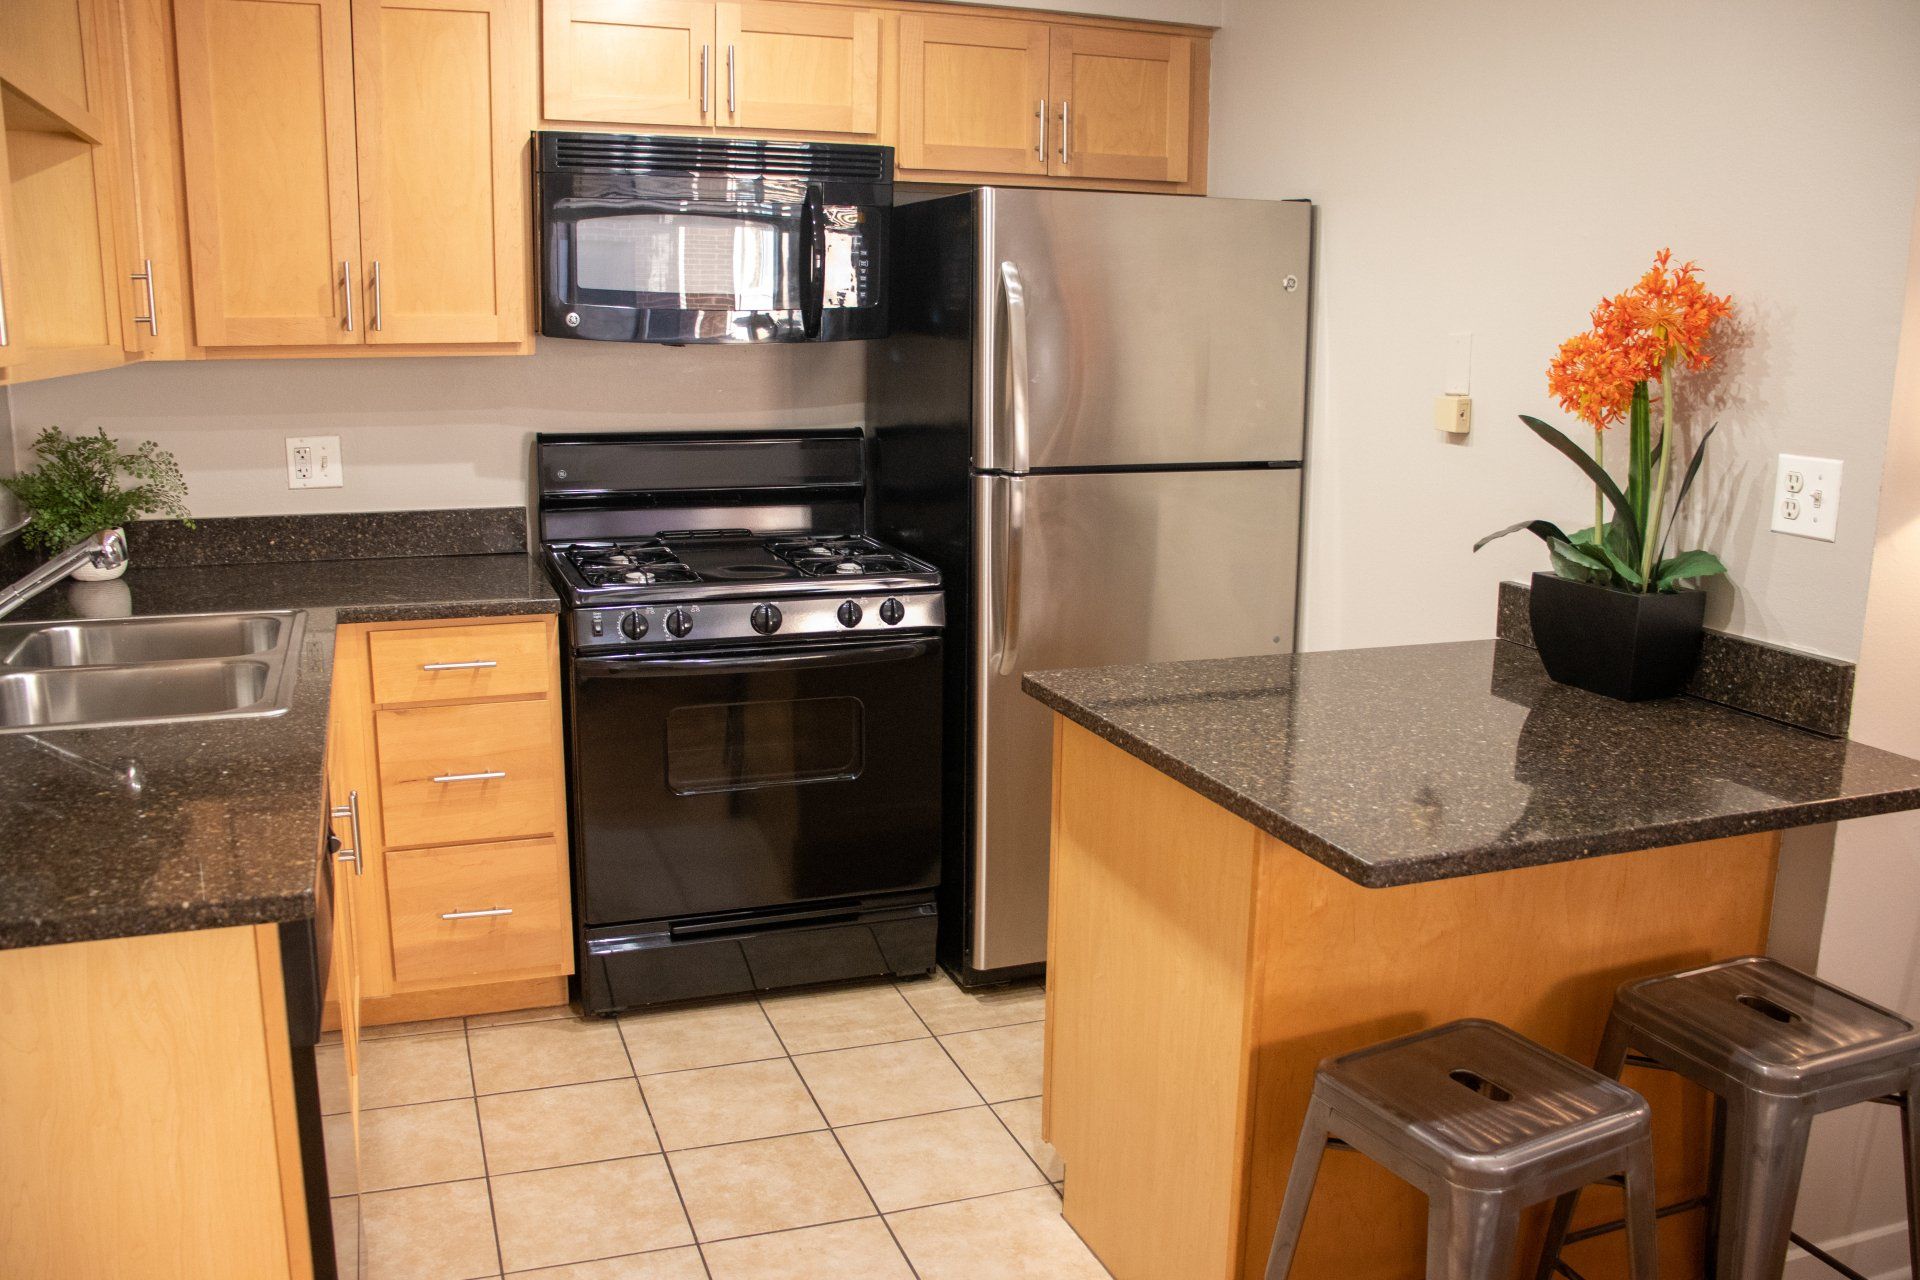 A kitchen with stainless steel appliances and granite counter tops at Reside on Morse.